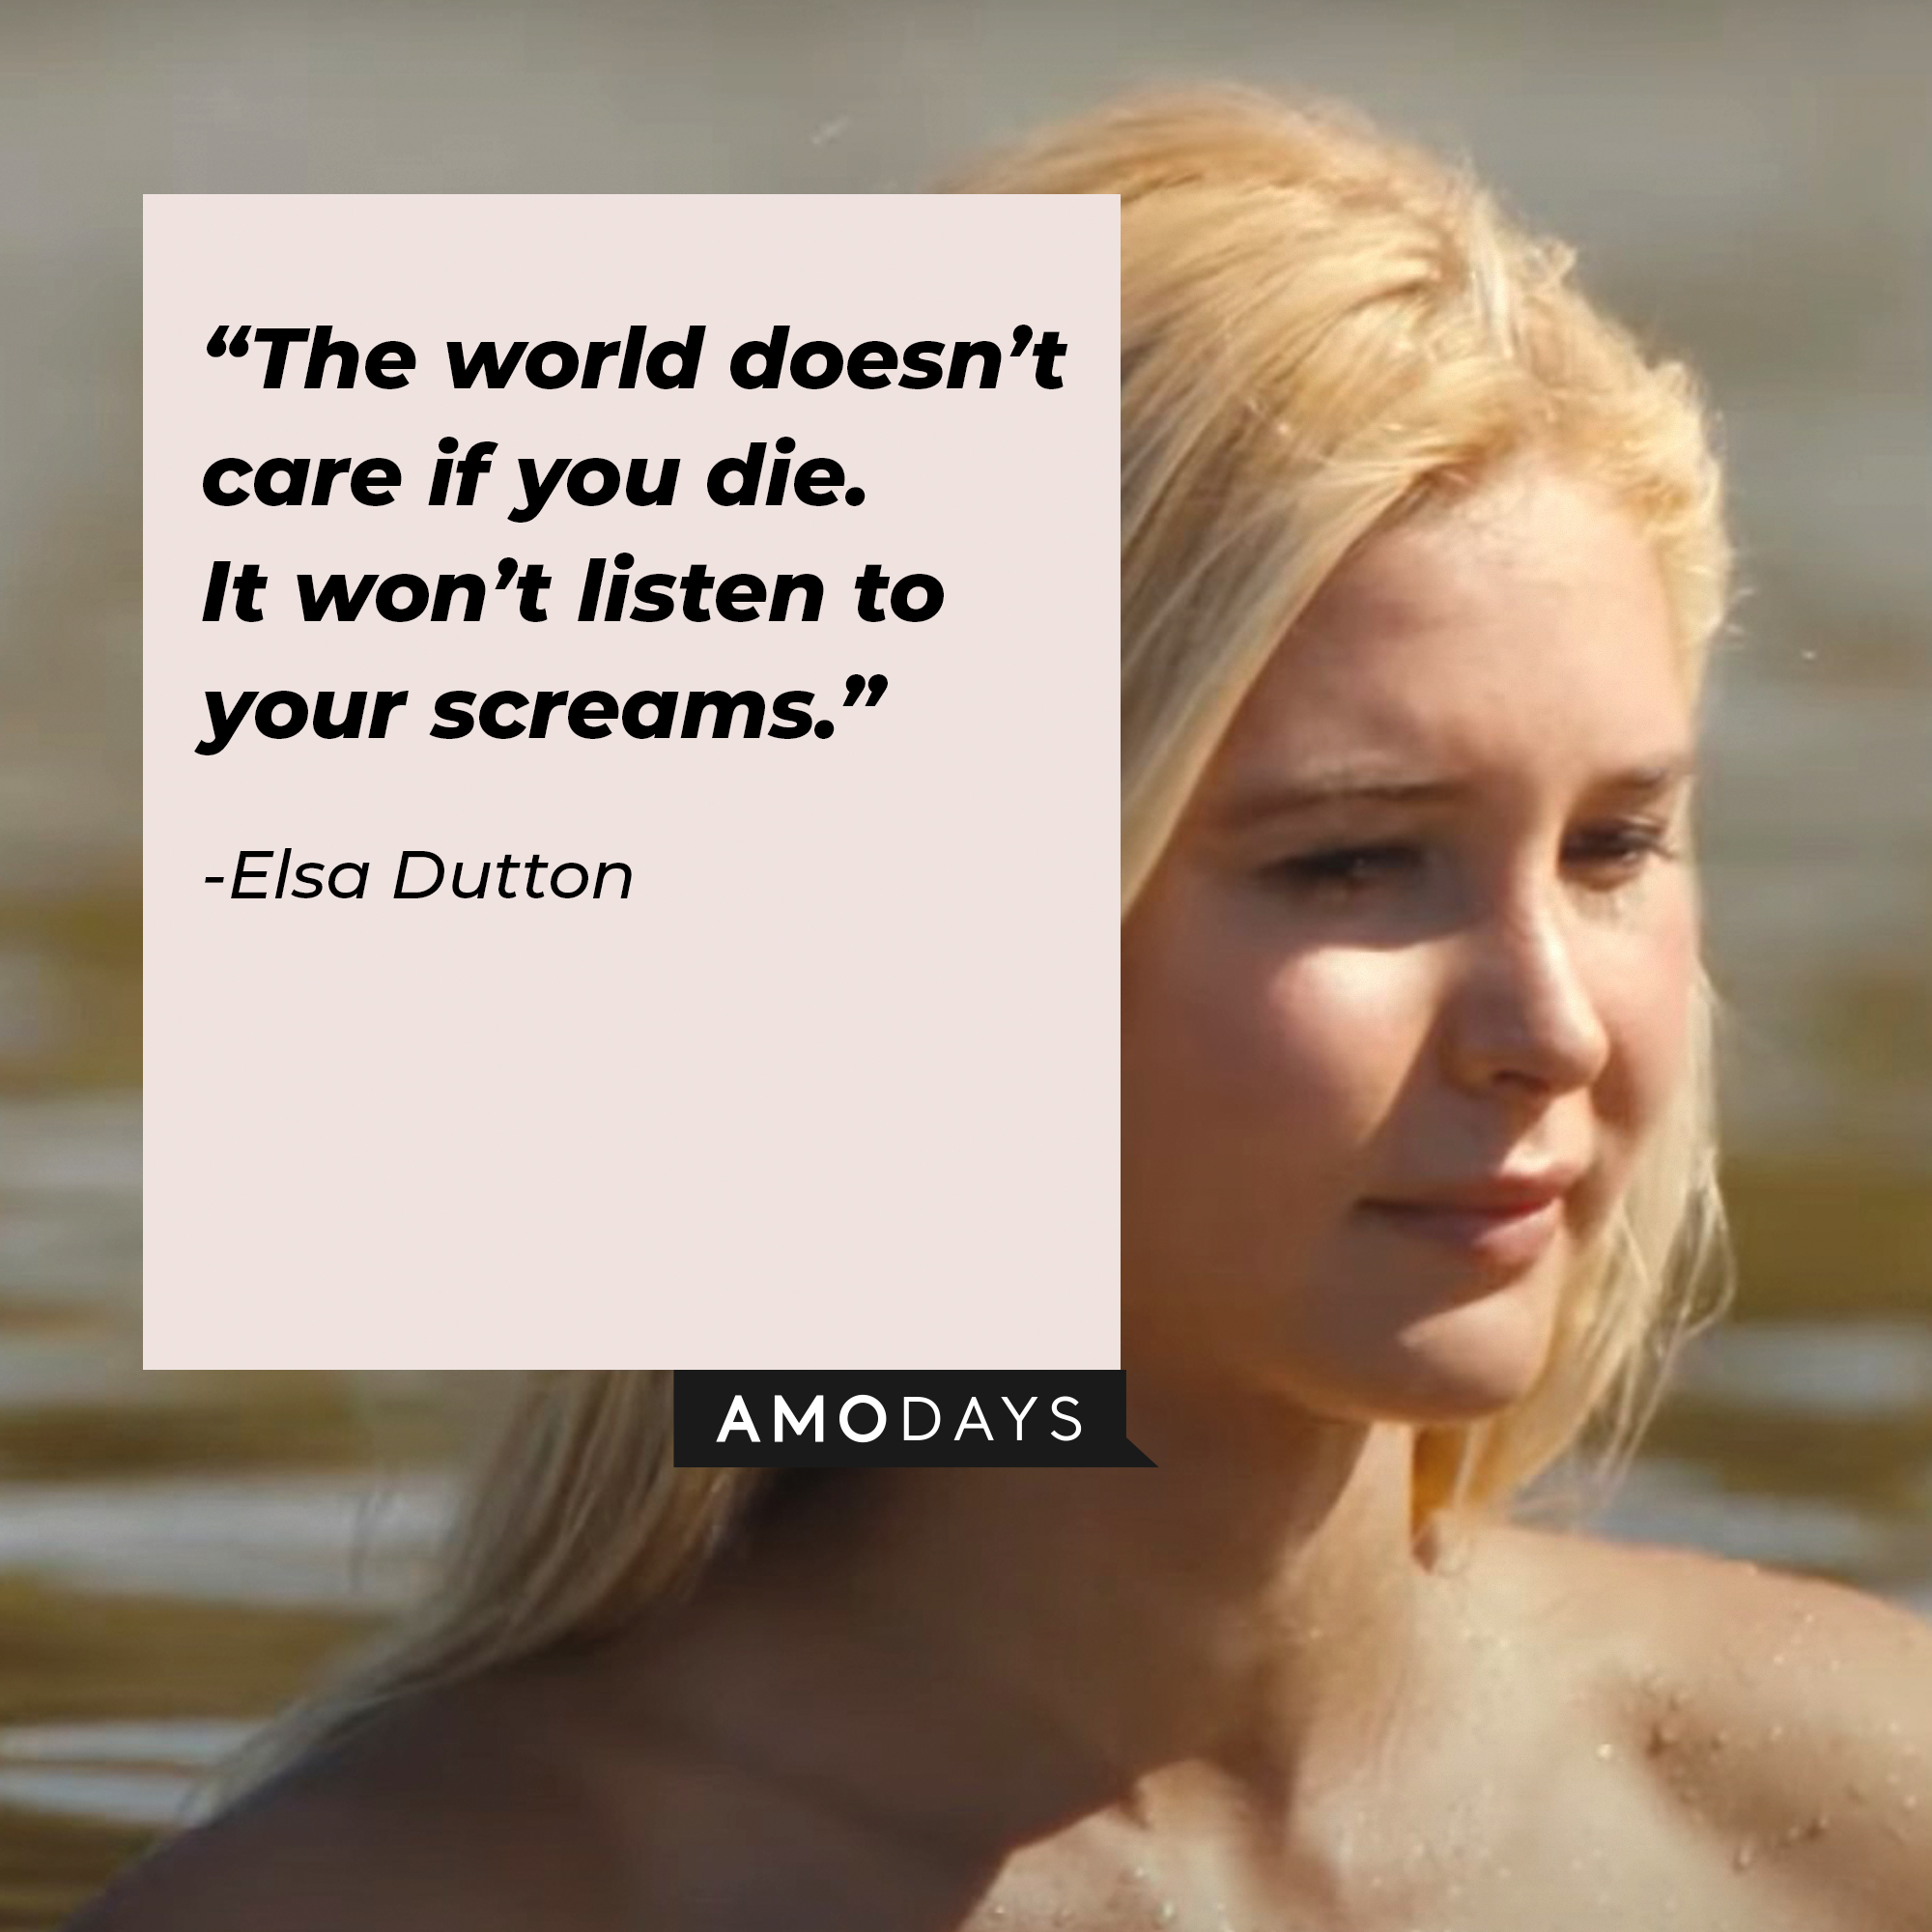 An image of Elsa Dutton with her quote: “The world doesn’t care if you die. It won’t listen to your screams.”┃Source: youtube.com/yellowstone